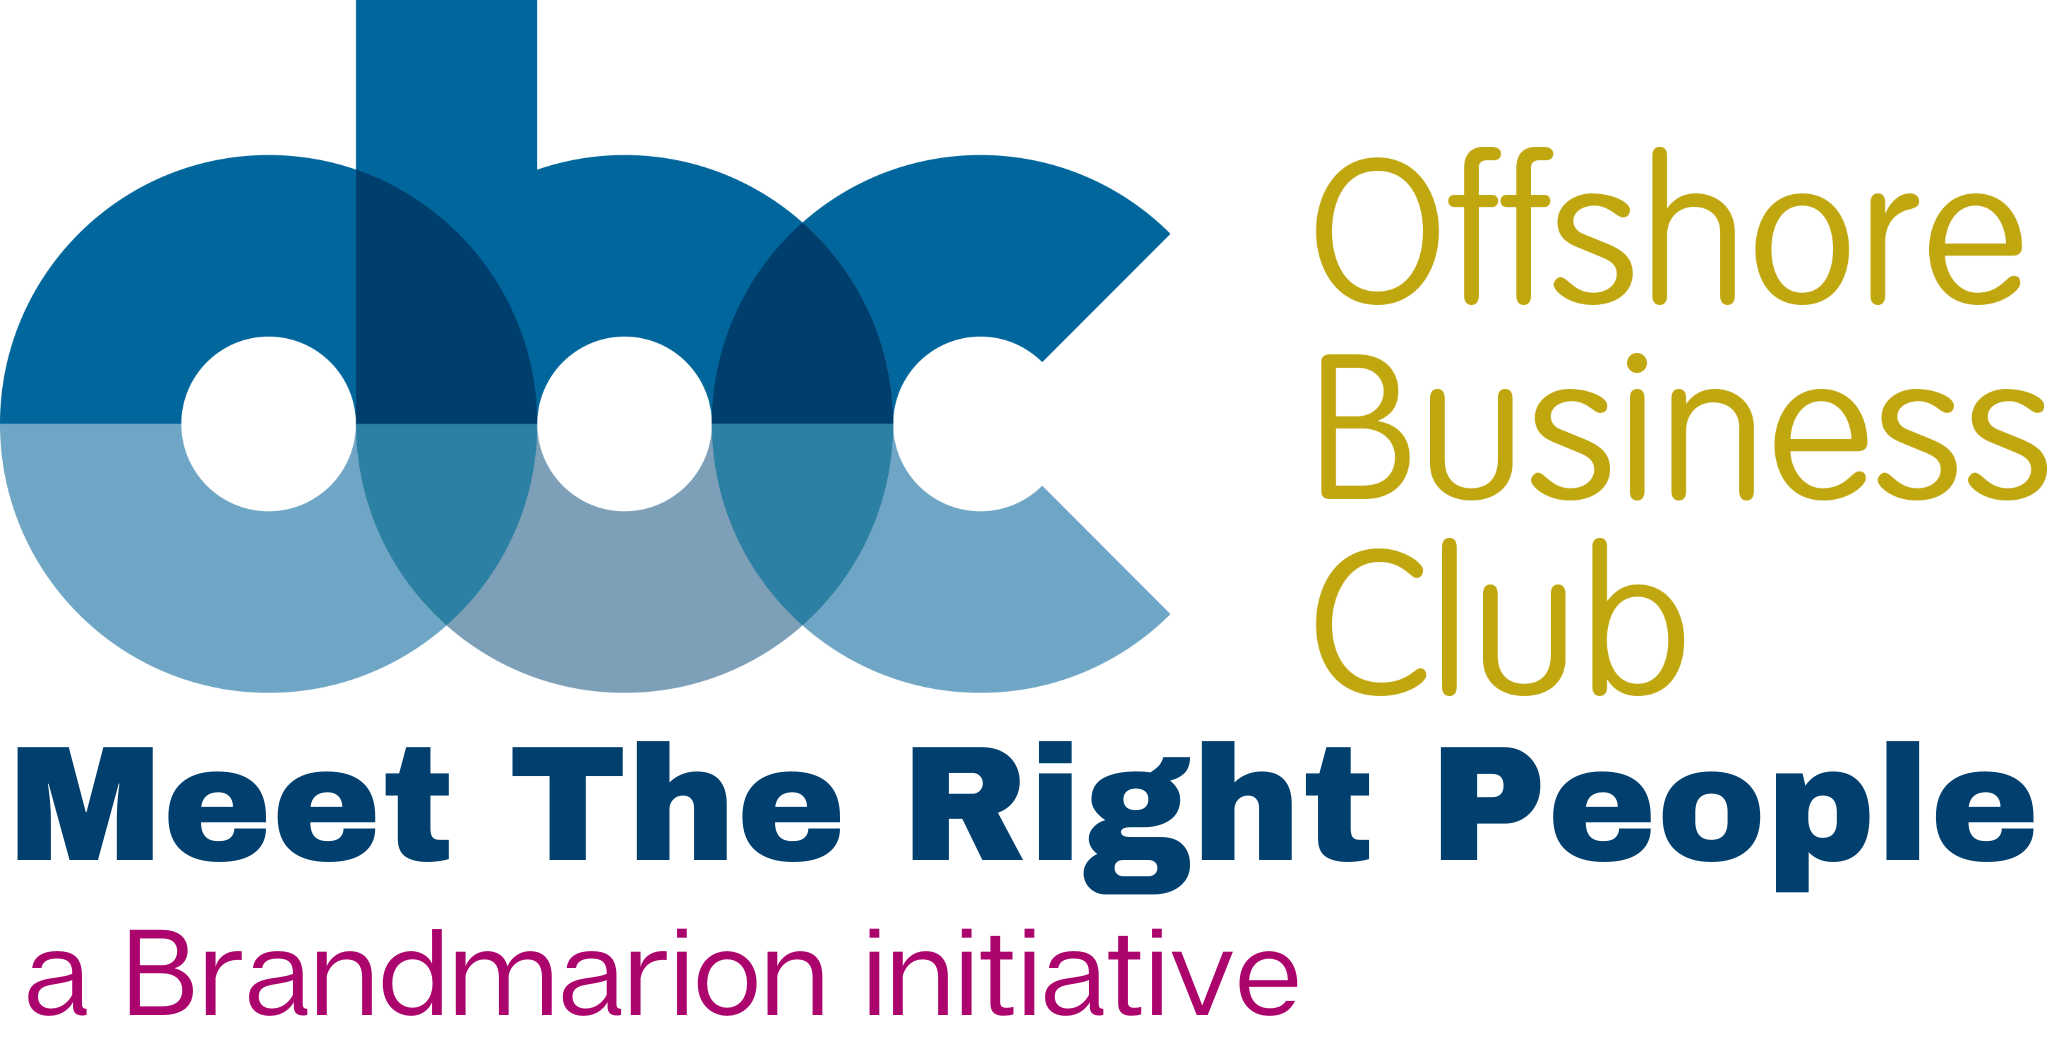 Offshore Business Club